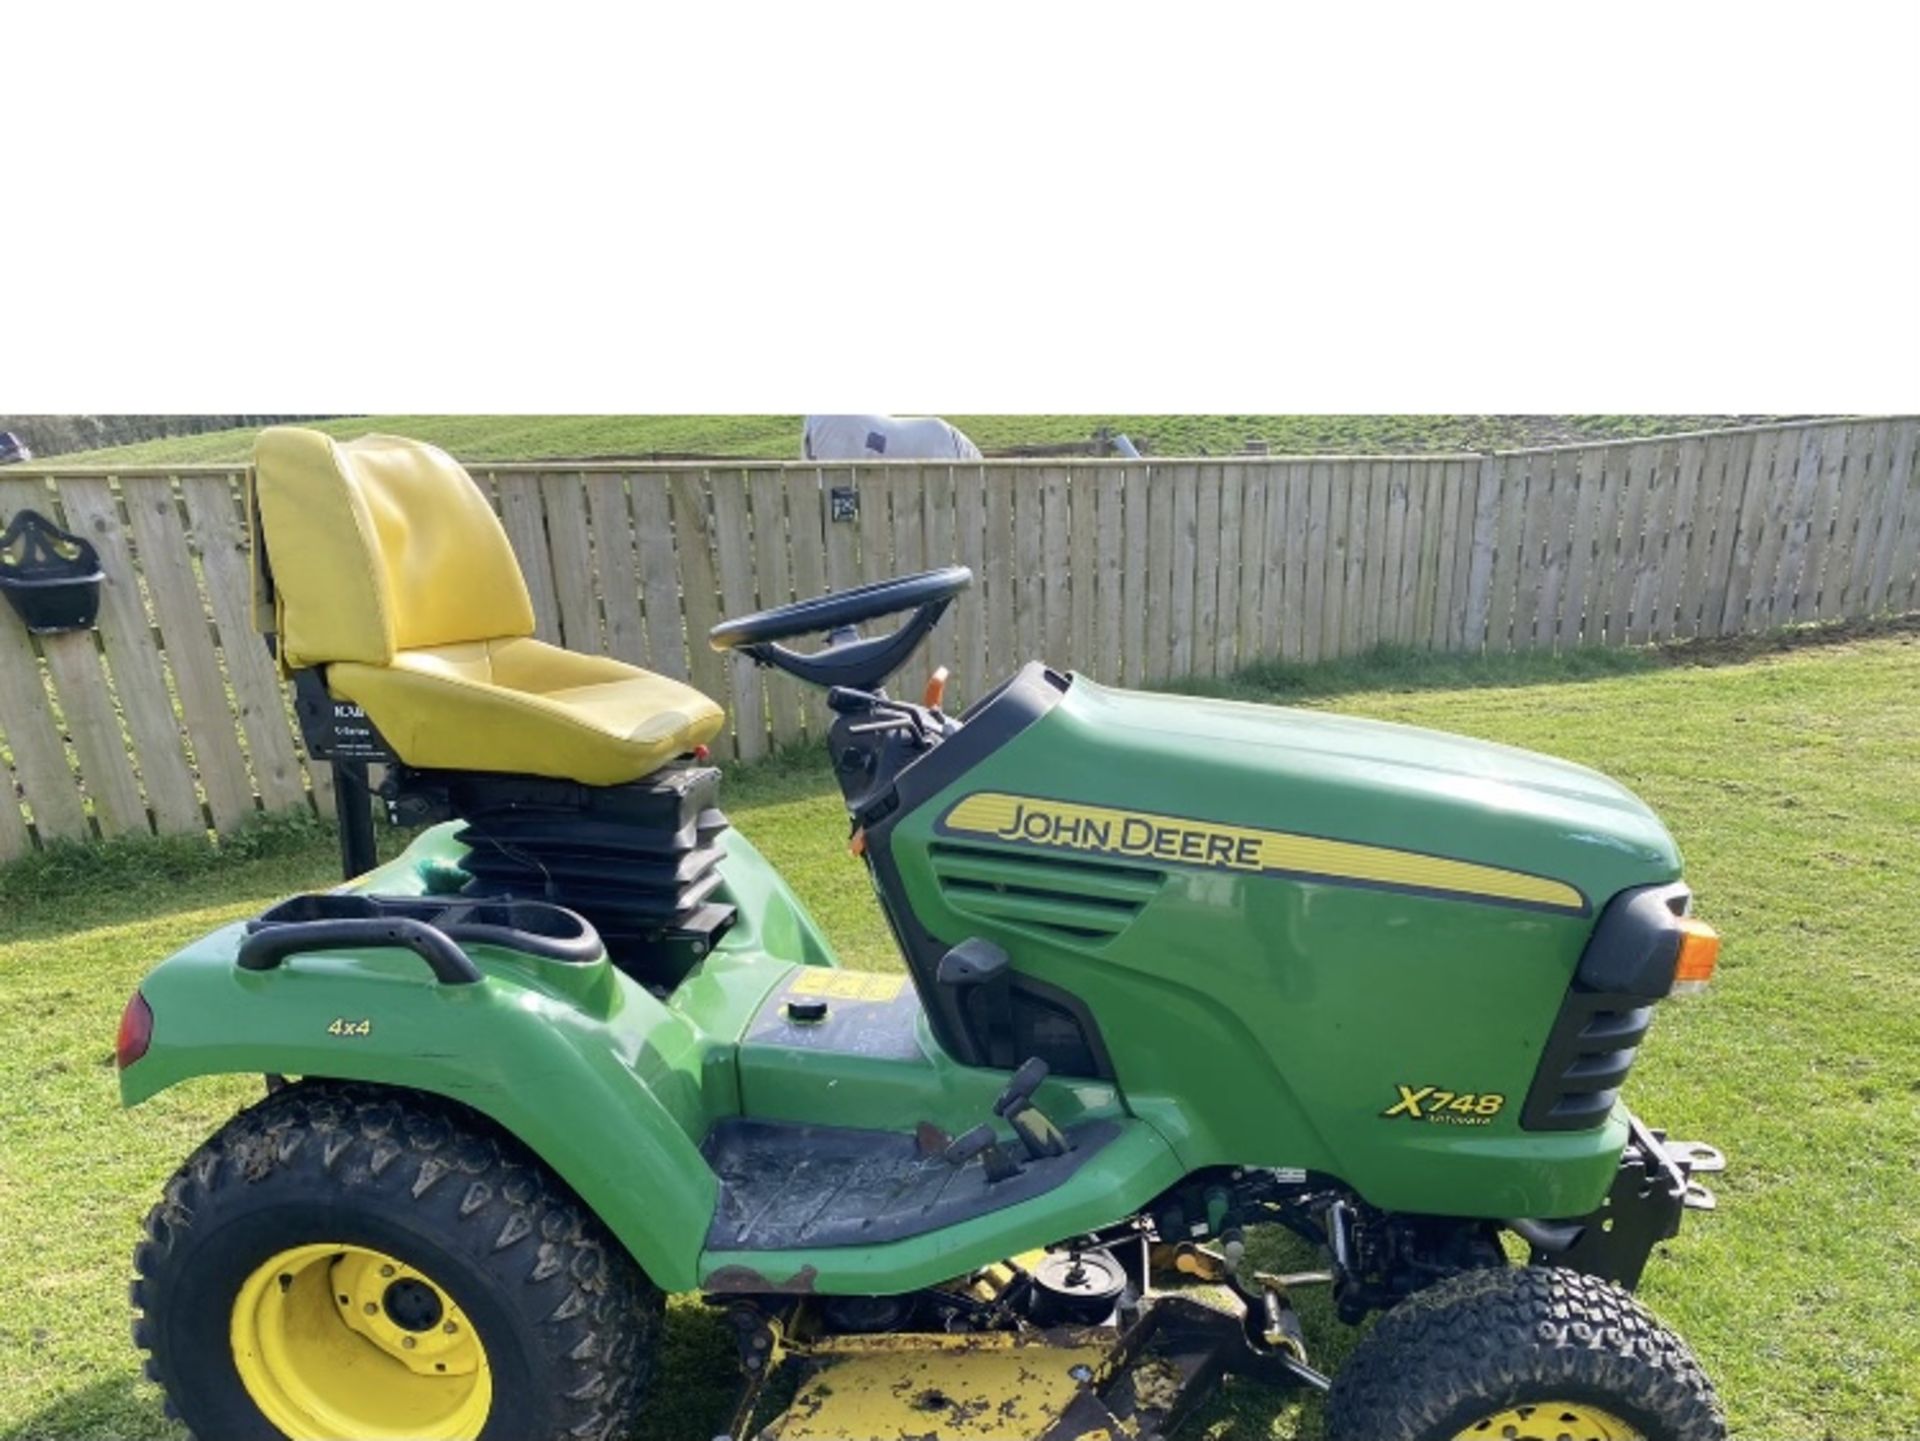 JOHN DEERE X748 DIESEL 4WD COMPANY TRACTOR RIDE ON MOWER LOCATION NORTH YORKSHIRE - Image 3 of 7